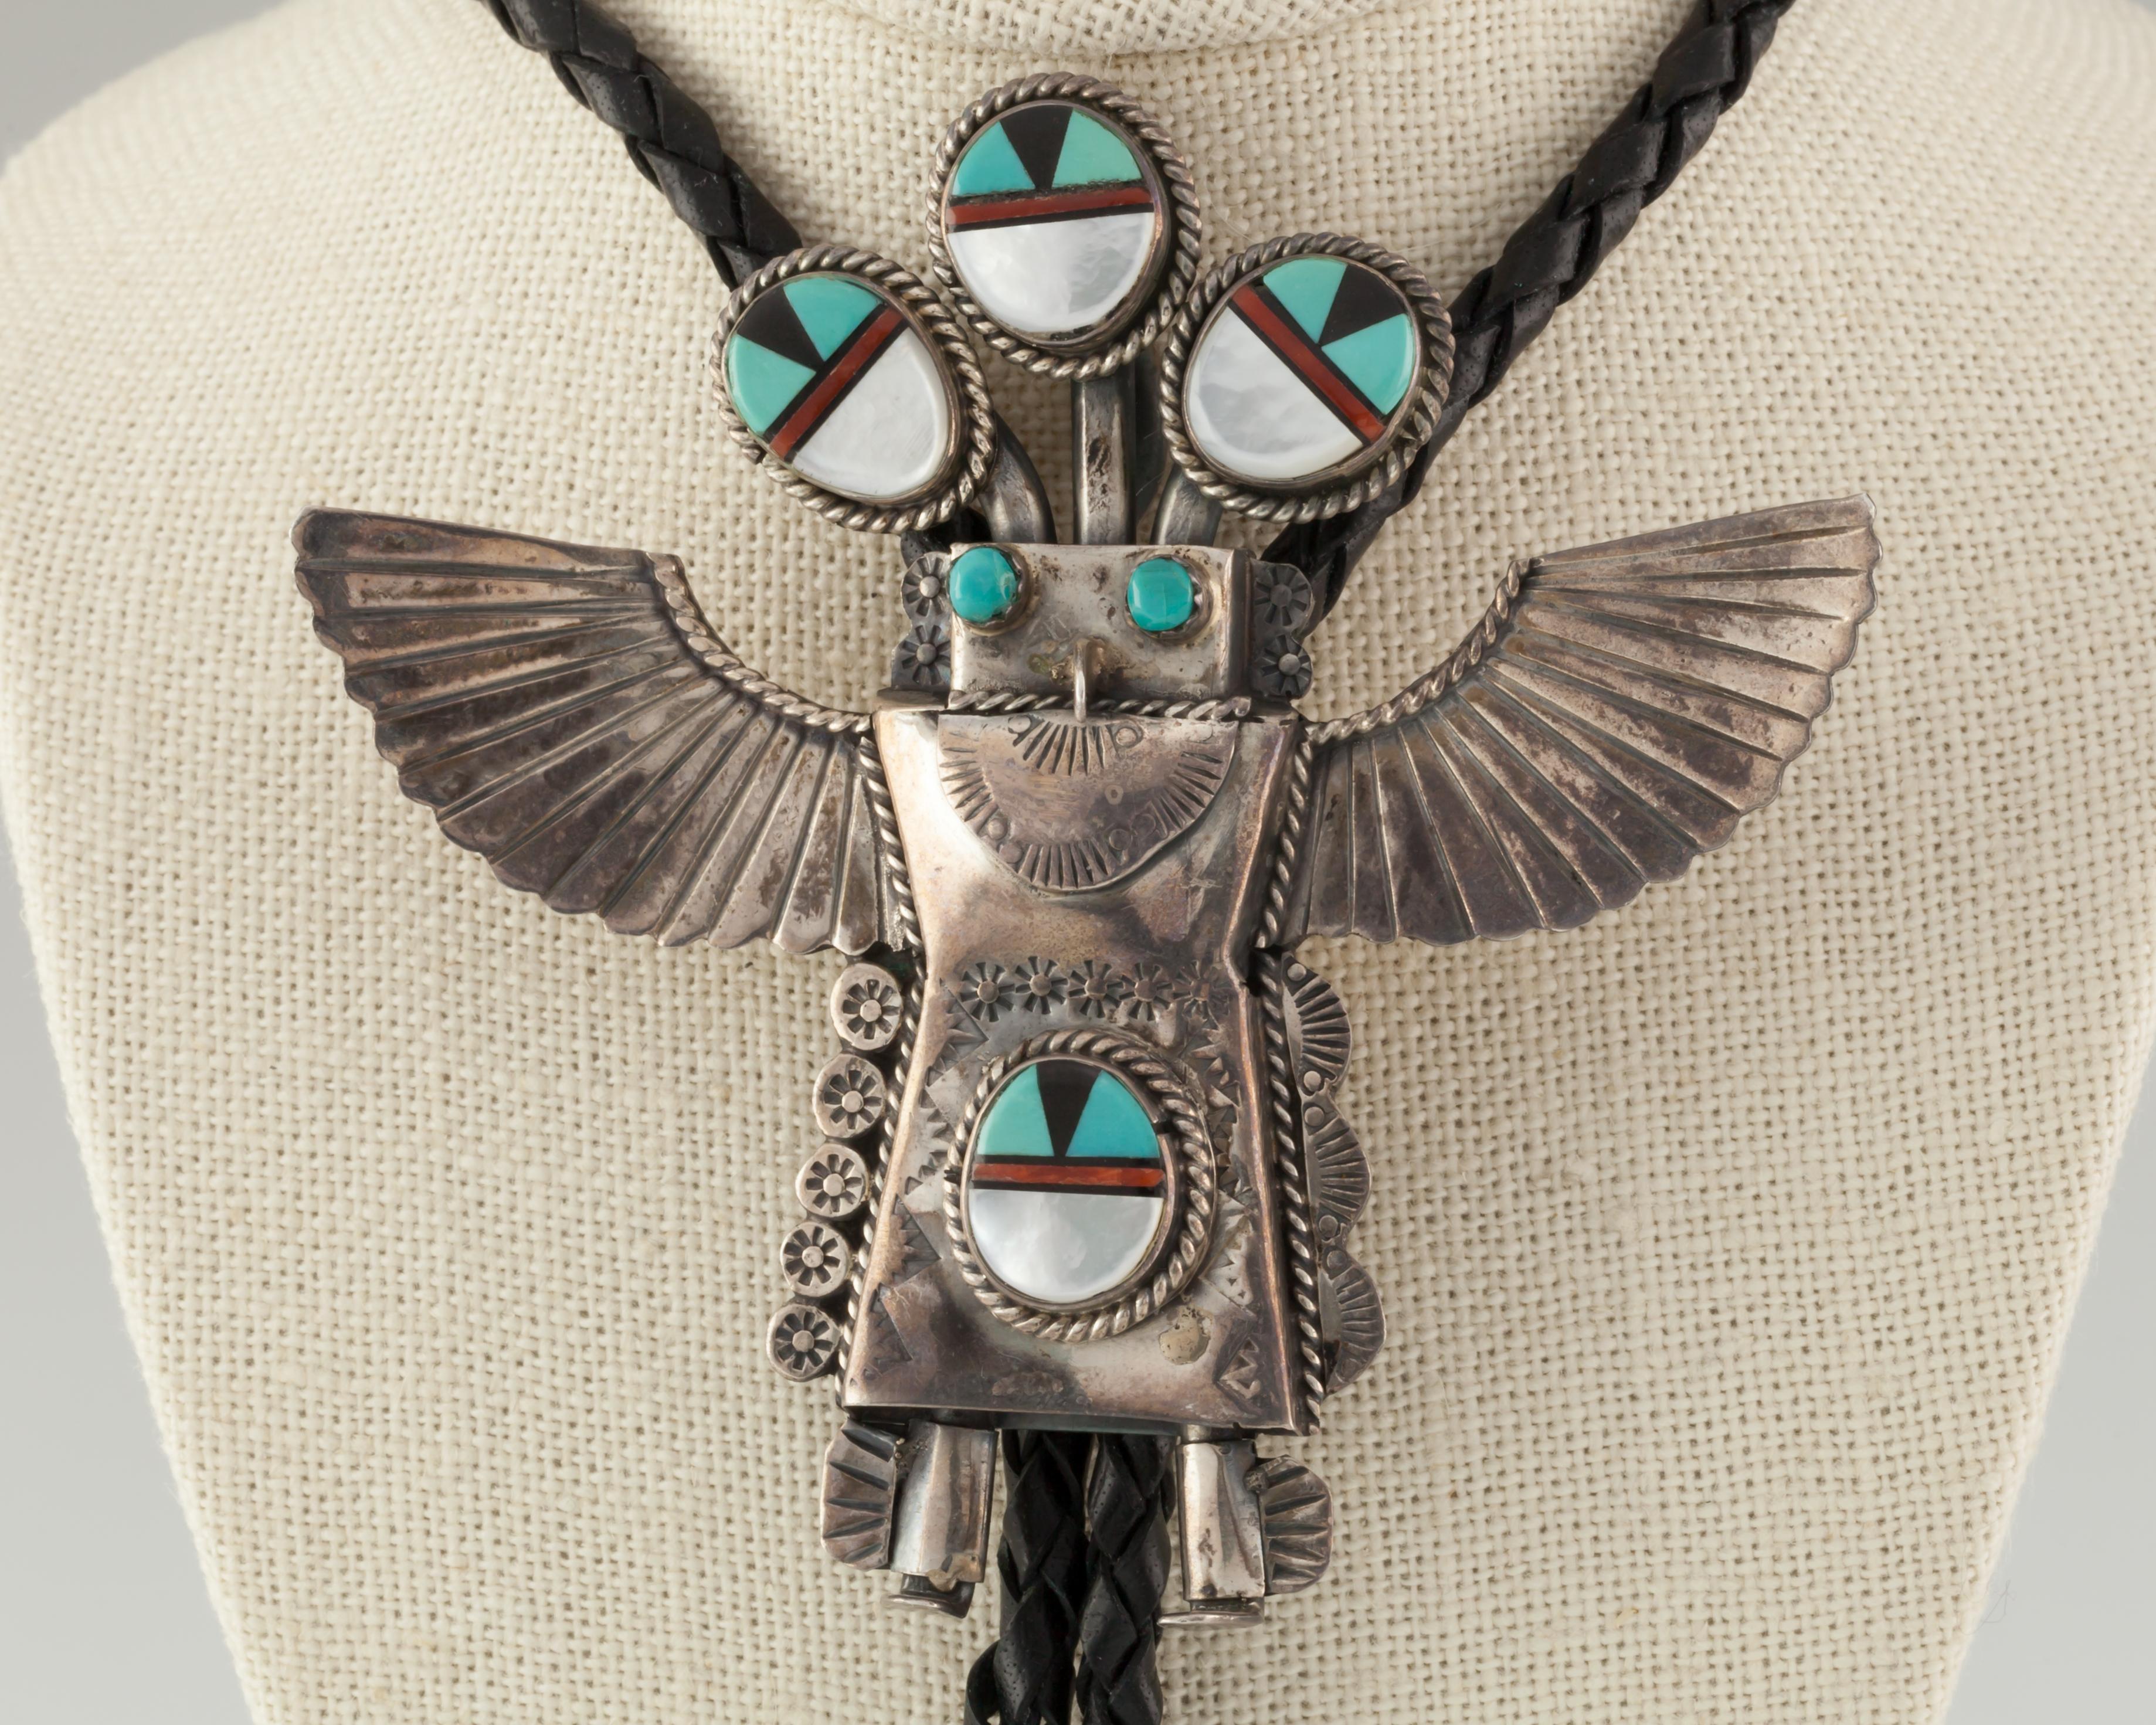 Zuni Kachina Sterling Silver & Turquoise Inlay Handcrafted Leather Bolo Tie In Good Condition For Sale In Sherman Oaks, CA